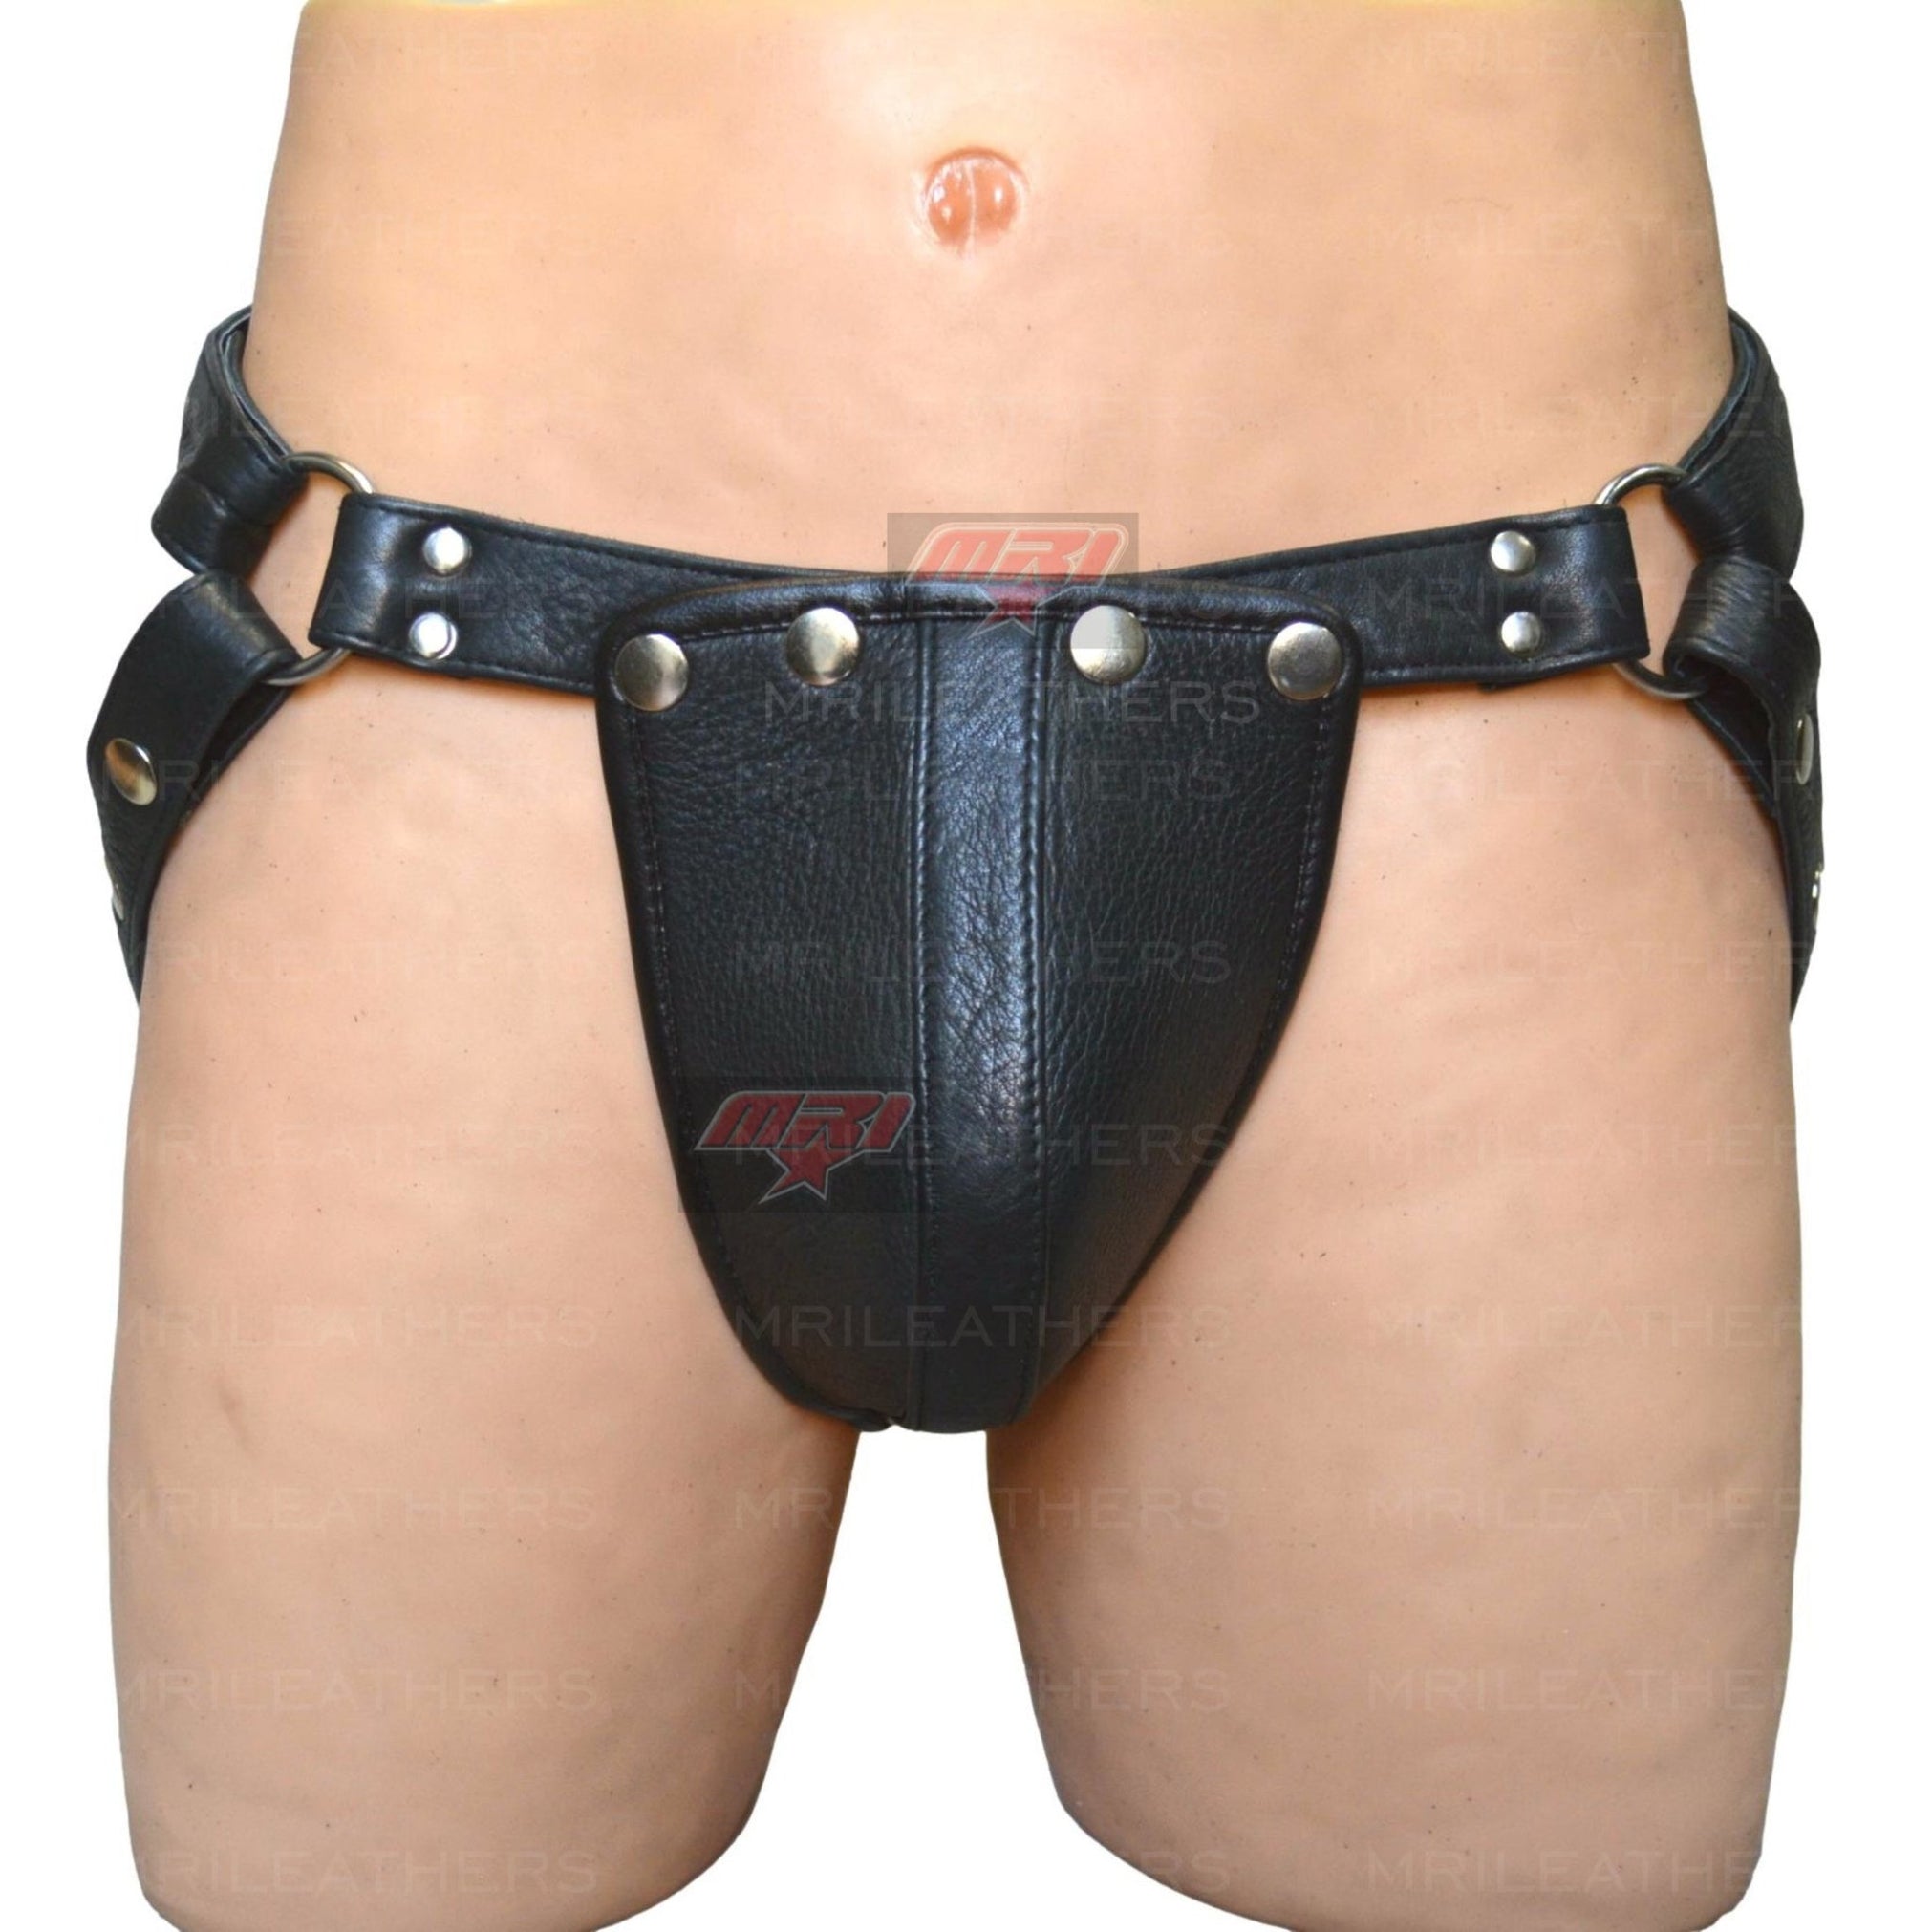 Men Leather Jockstrap -jock -thong removable pouch, lined with soft leather  stud spike $82.58